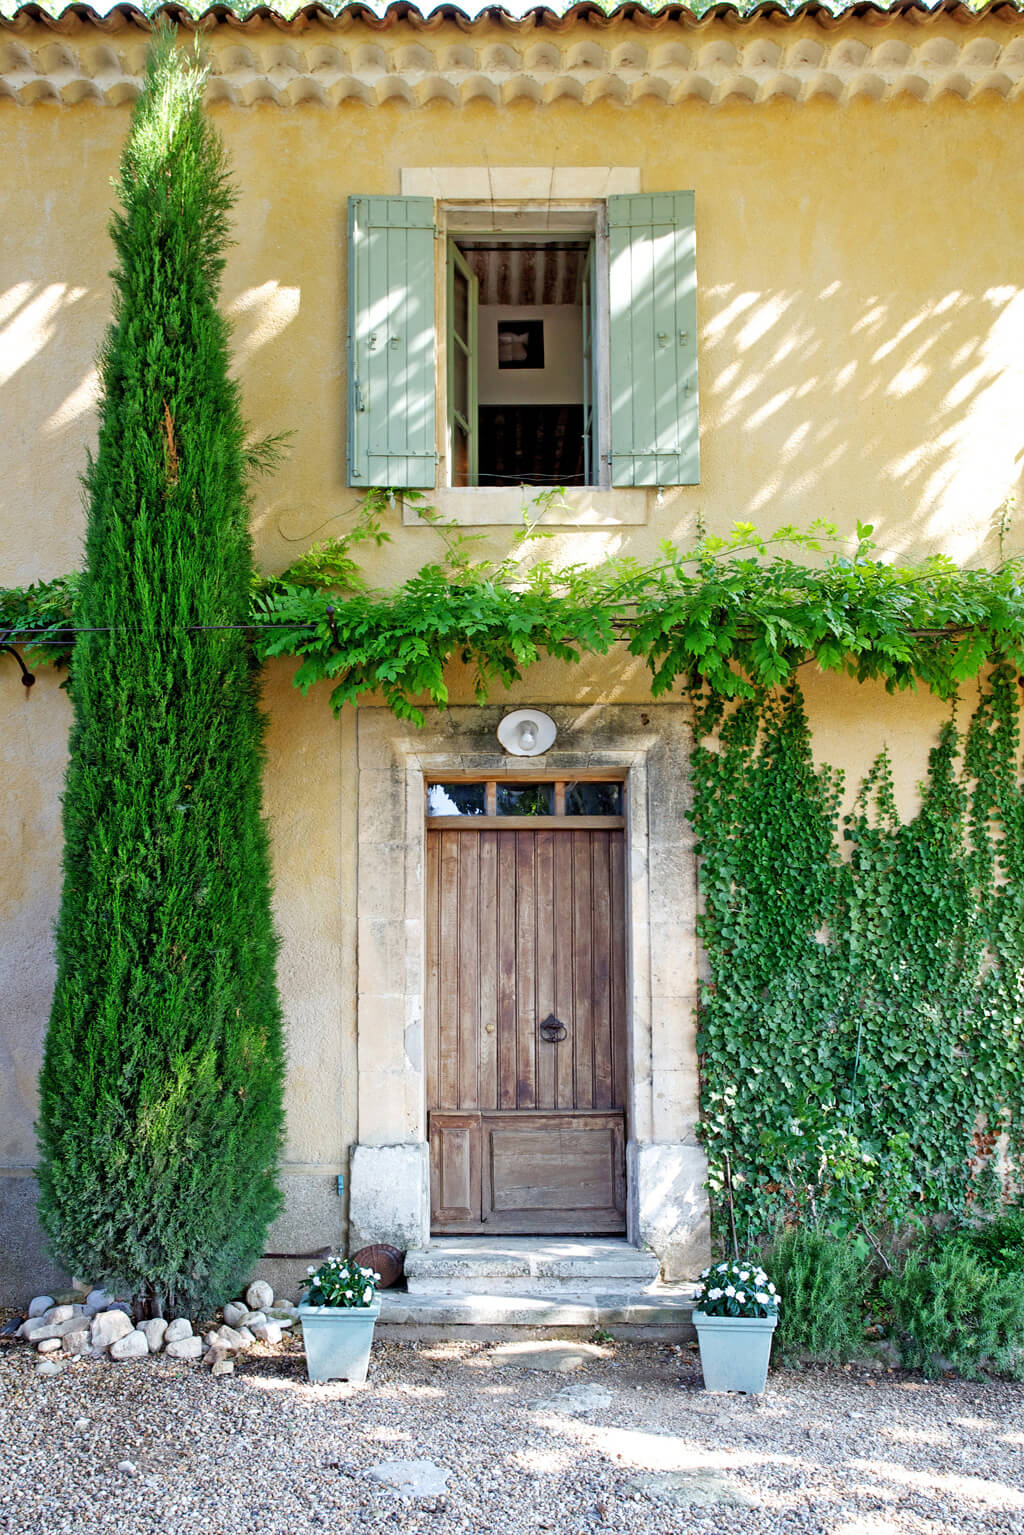 Come discover French Old World Design Inspiration: 18th Century Provençal Bastide + Paint Color Ideas! #frenchcountry #oldworld #interiordesign #provence